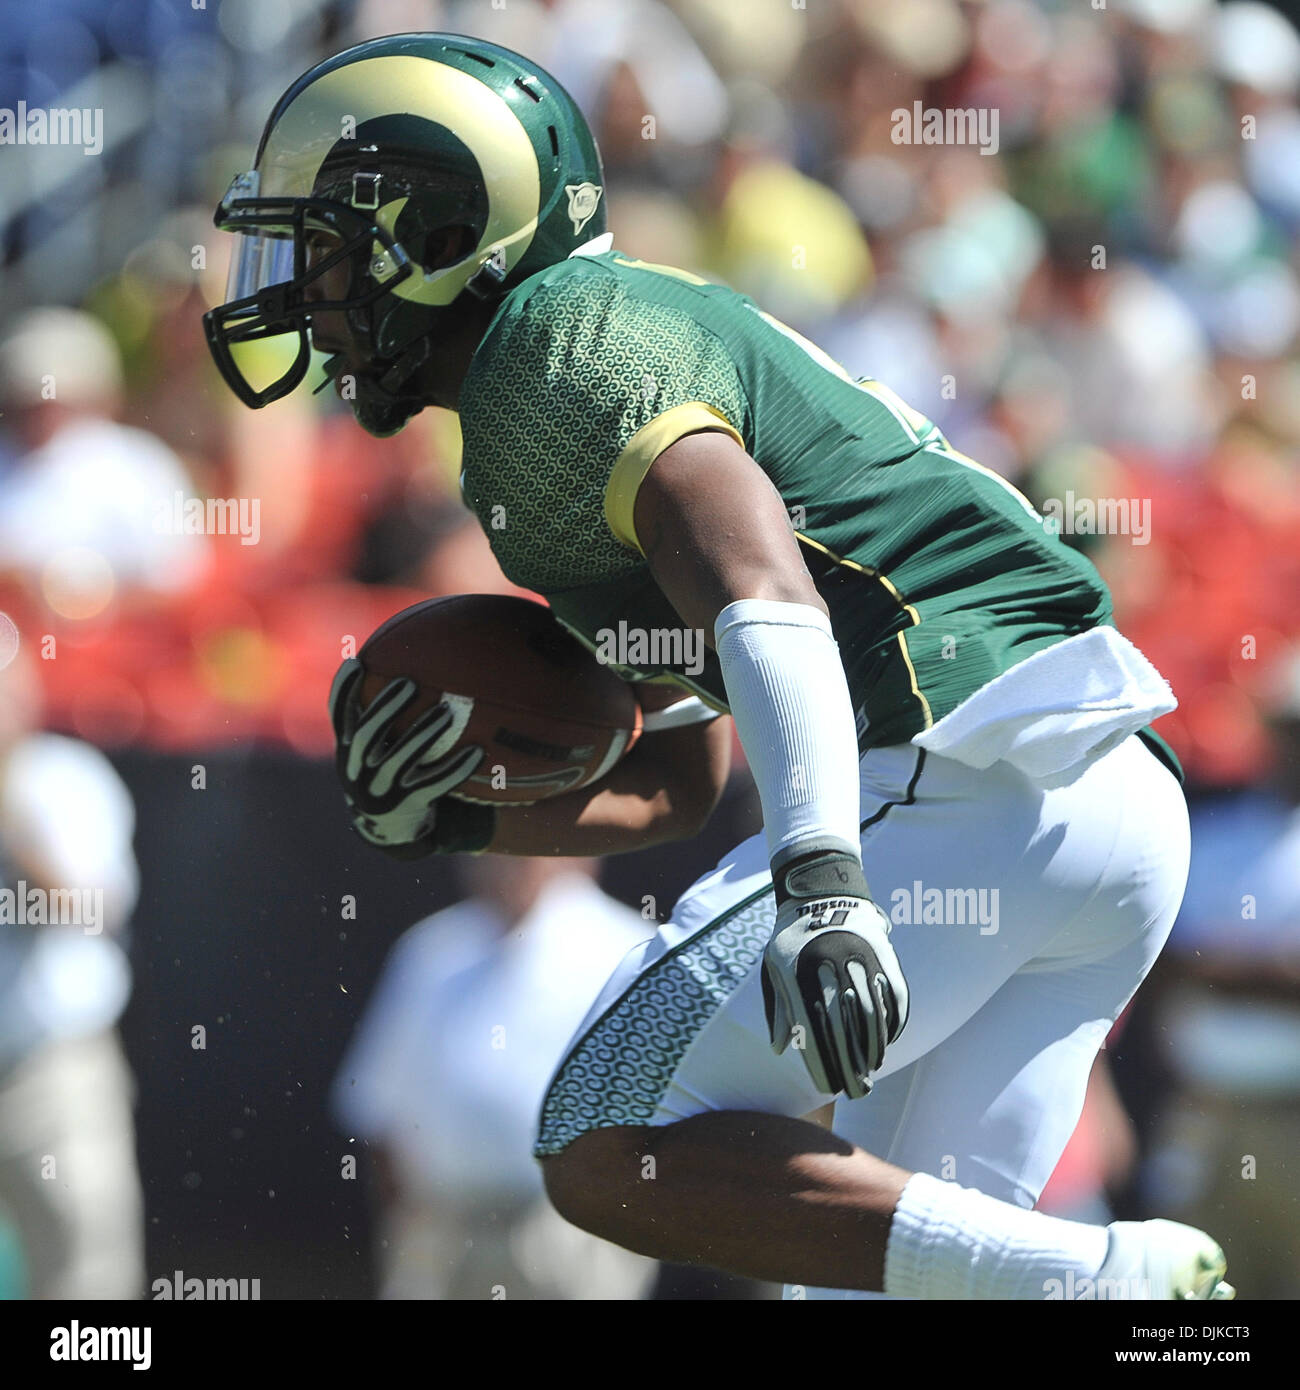 Sep. 04, 2010 - Denver, Colorado, United States of America - Colorado State Rams cornerback Momo Thomas (5) returns a kick during Rocky Mountain Showdown game between the Colorado State Rams and the Colorado Buffaloes at Invesco Field at Mile High. Colorado defeated Colorado State by a score of 24-3. (Credit Image: © Andrew Fielding/Southcreek Global/ZUMApress.com) Stock Photo